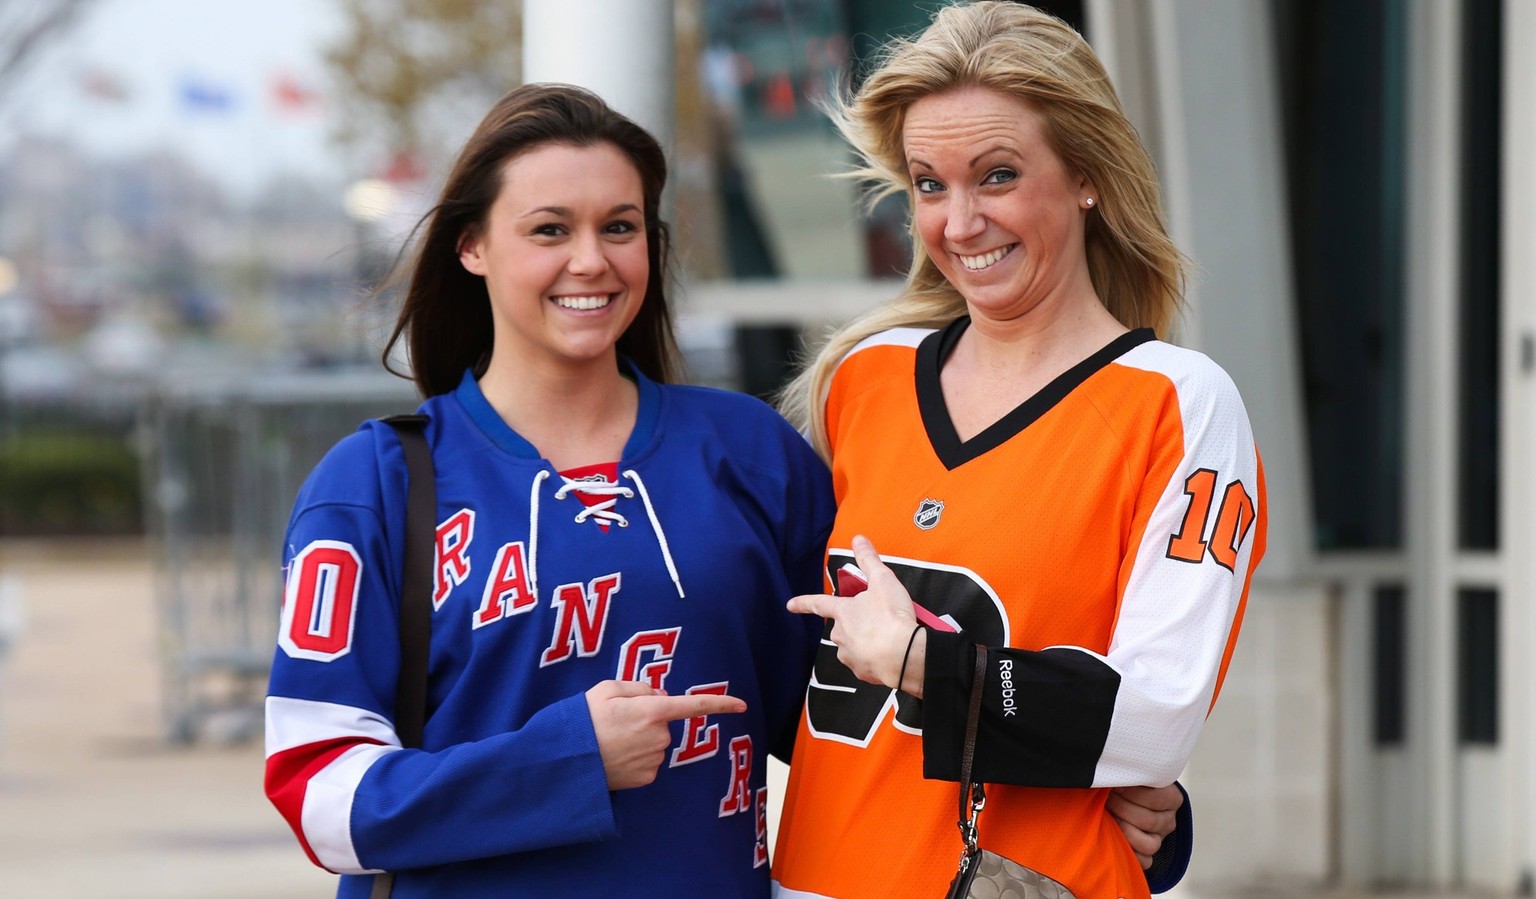 April 22, 2014: Two female fans wearing opposing teams pose for a photo prior to a first round playoff game at the Wells Fargo Center in Philadelphia, Pennsylvania. NHL Eishockey Herren USA APR 22 Sta ...